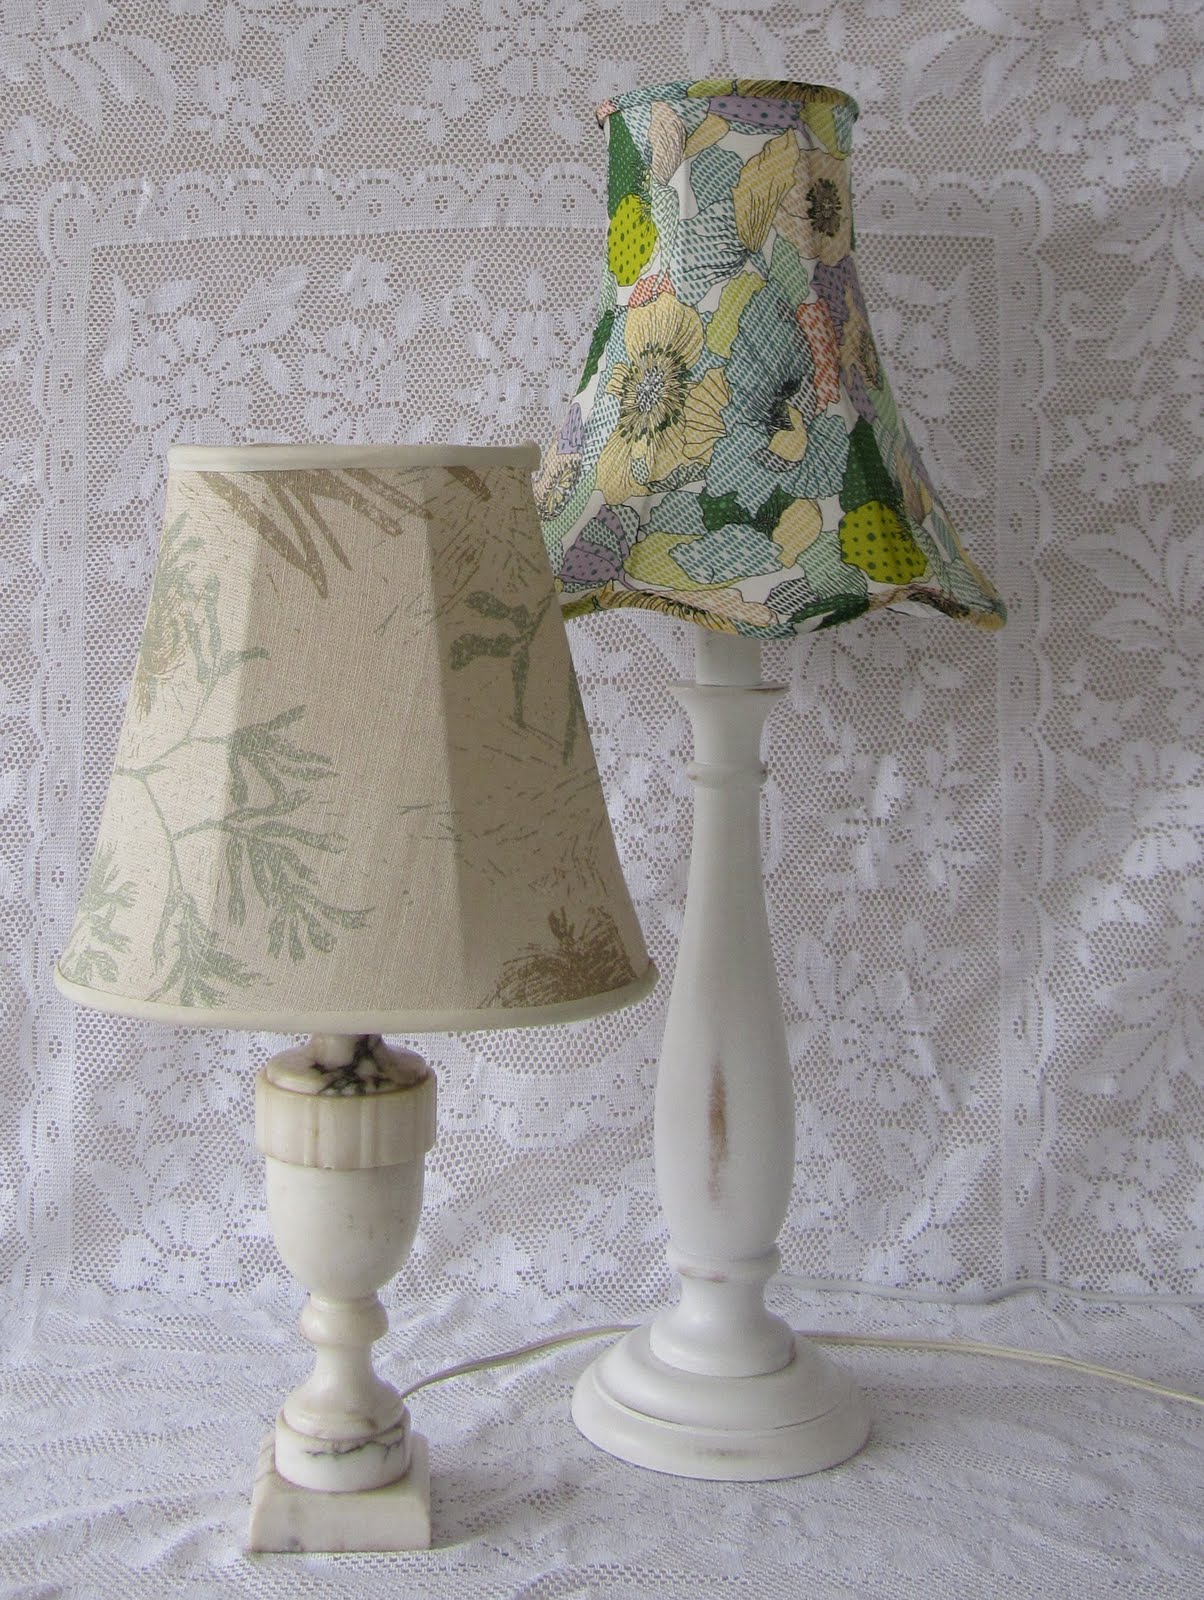 Recover A Lampshade Tutorial, How To Cover An Old Lampshade With Fabric